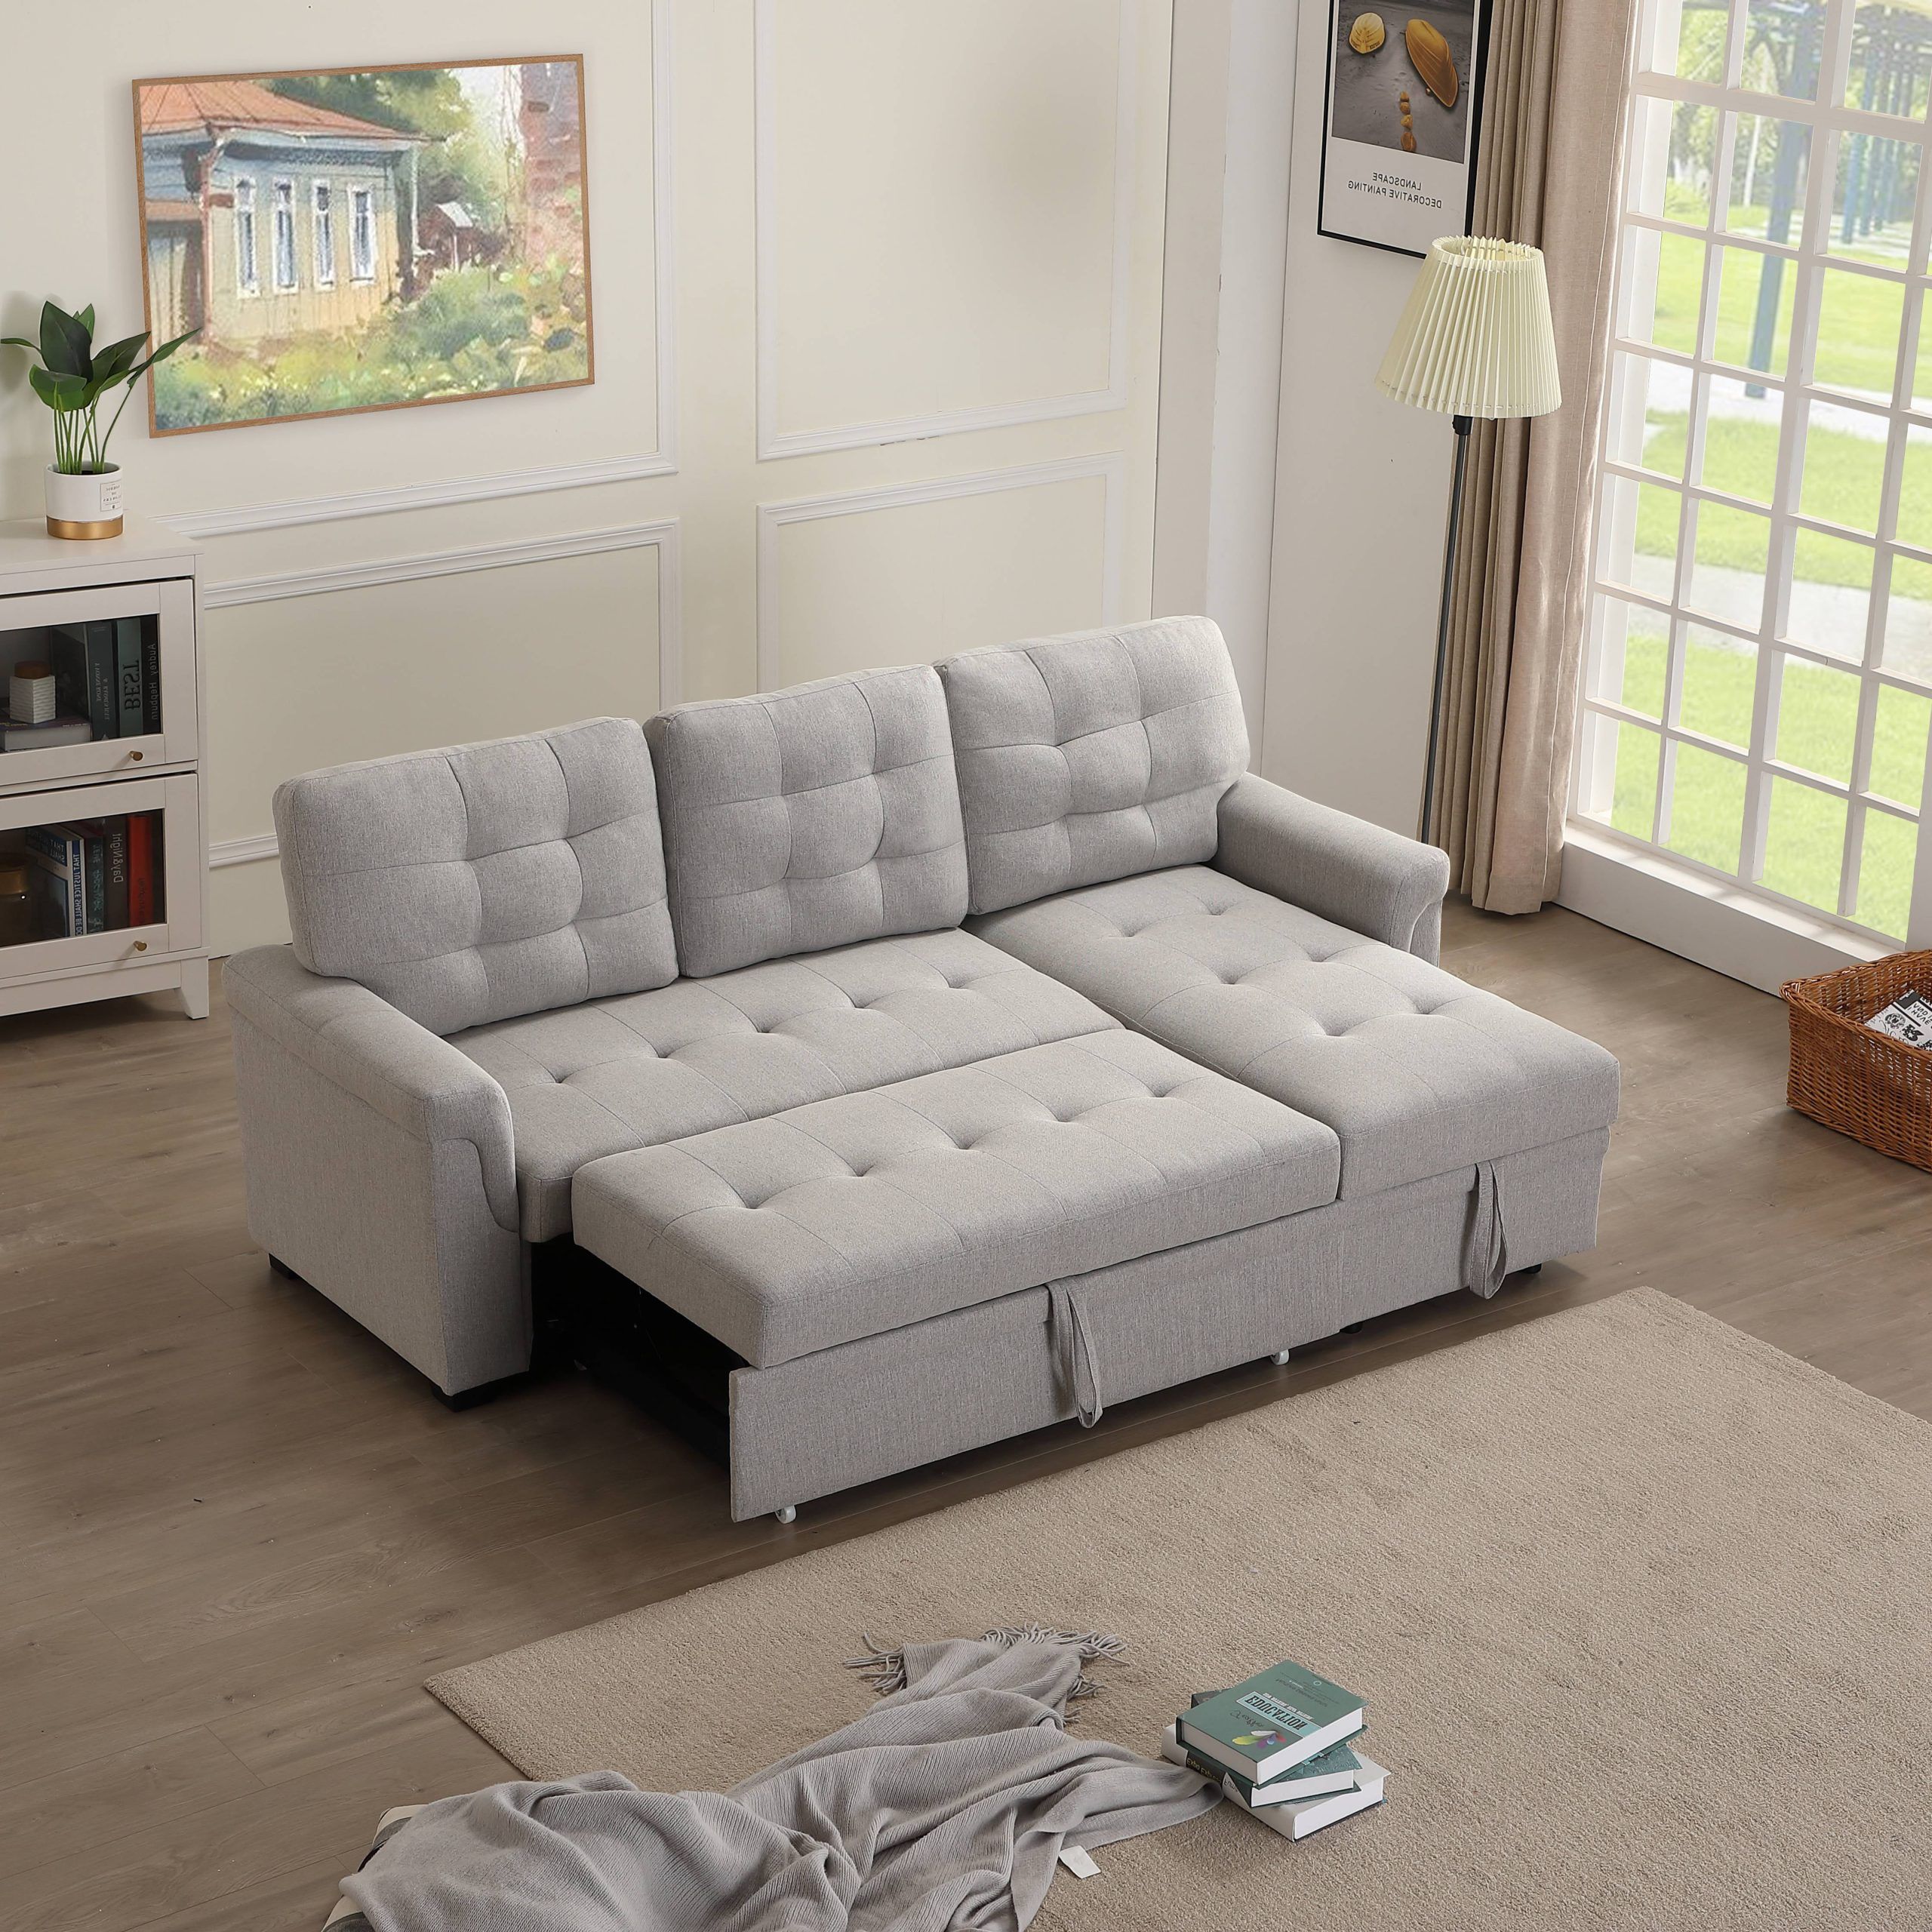 Madison Home Traditional Small Space Velvet Sectional Sofa With In Modern Velvet Sofa Recliners With Storage (Gallery 10 of 20)